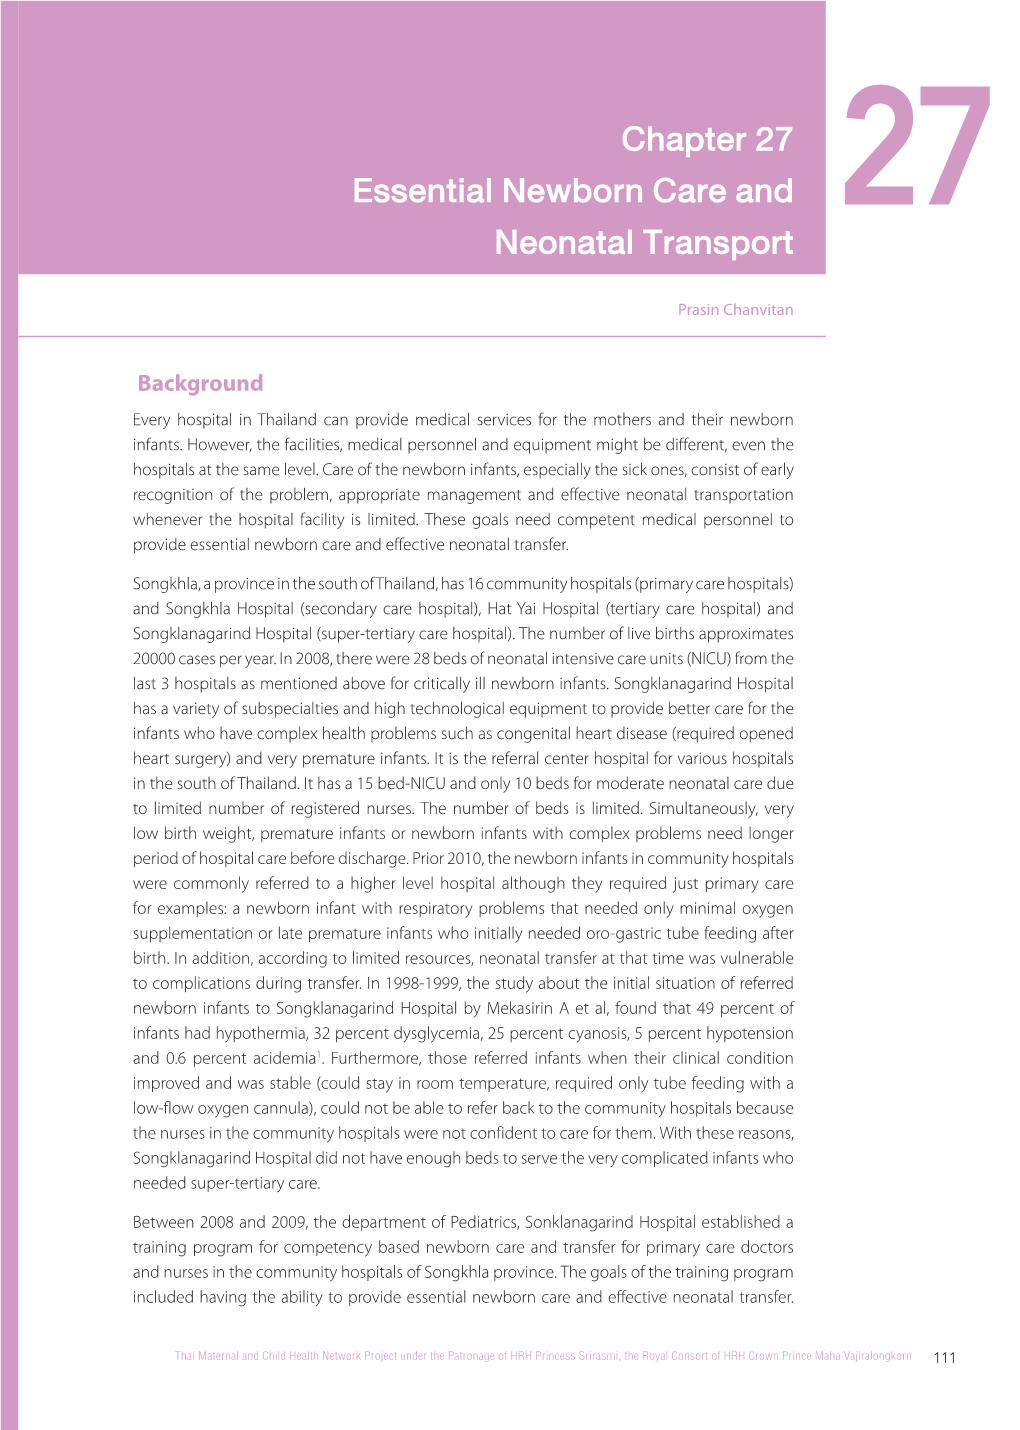 Chapter 27 Essential Newborn Care and Neonatal Transport